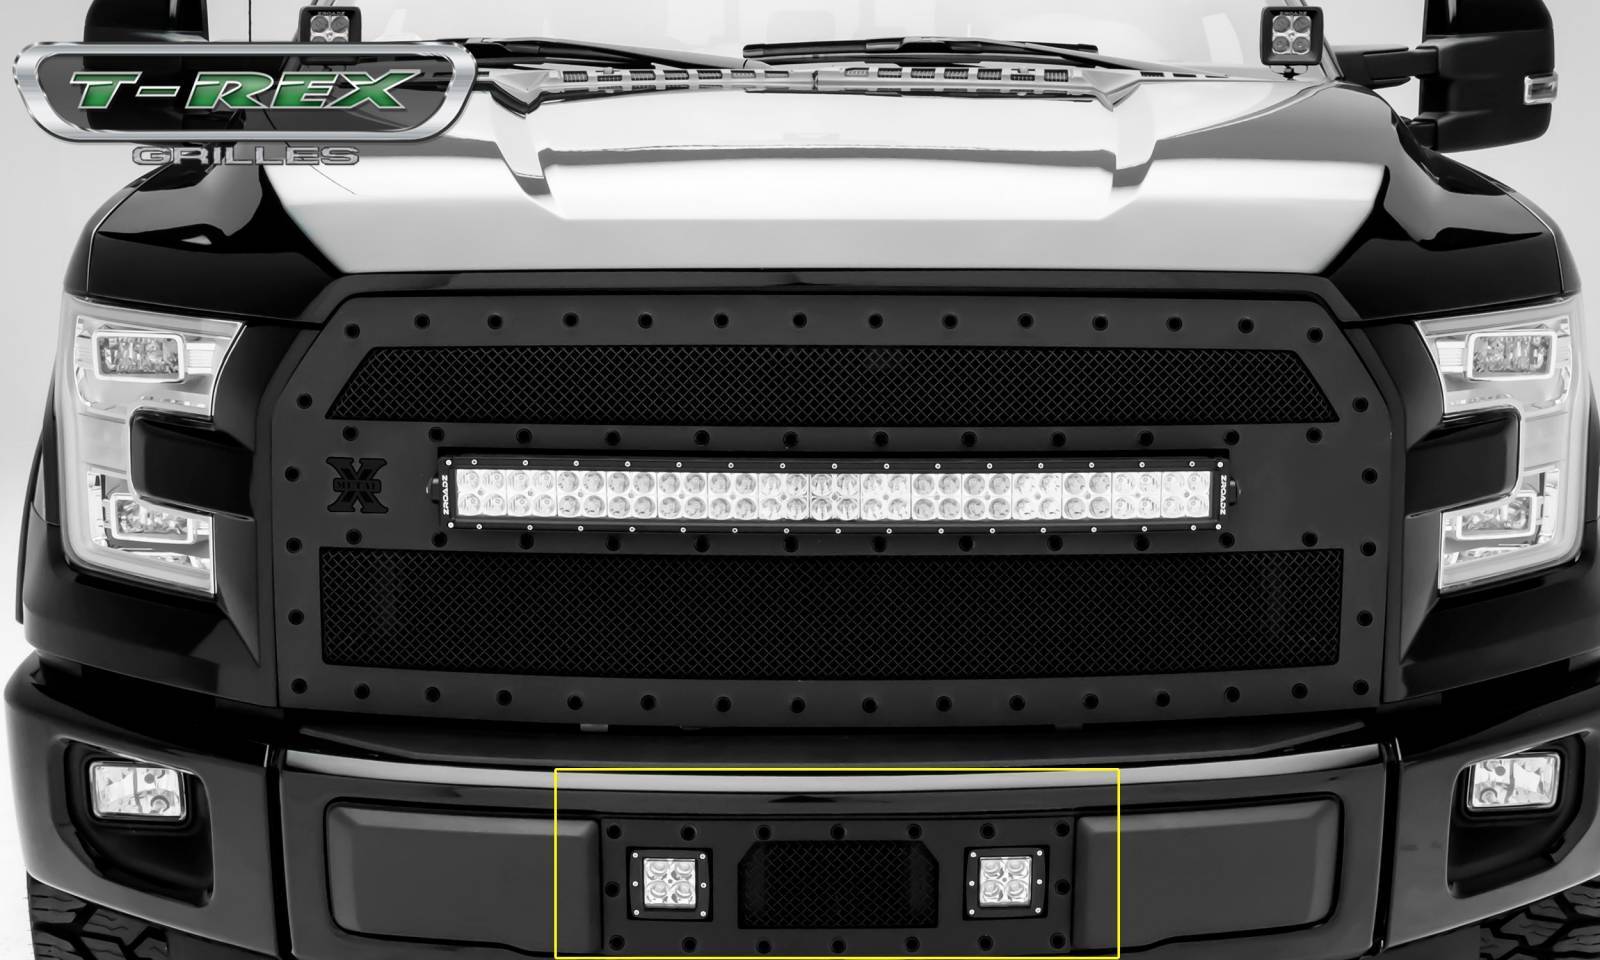 T-REX Grilles - 2015-2017 F-150 Stealth Torch Bumper Grille, Black, 1 Pc, Insert, Black Studs with (2) 3" LED Cube Lights - Part # 6325731-BR